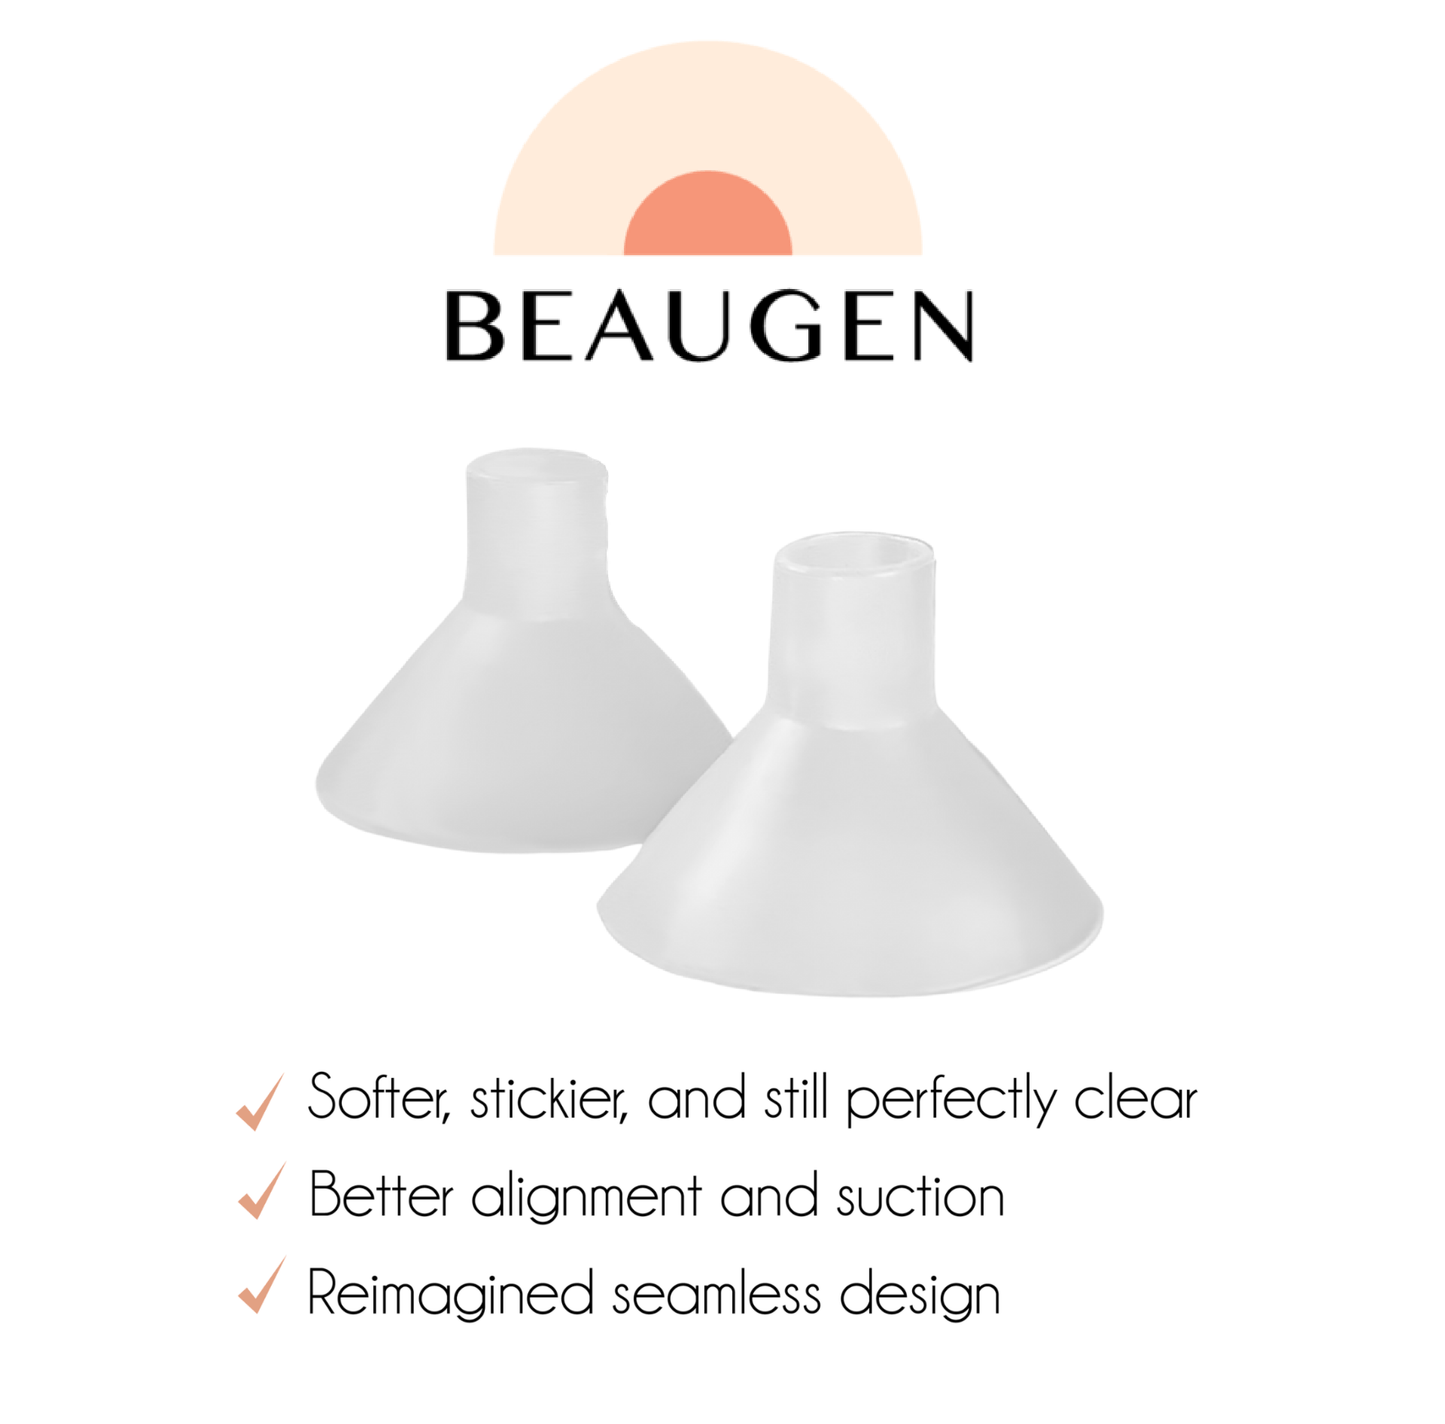 BeauGen Breast Pump Cushions - 2 Pairs (fits flanges 21-28m)